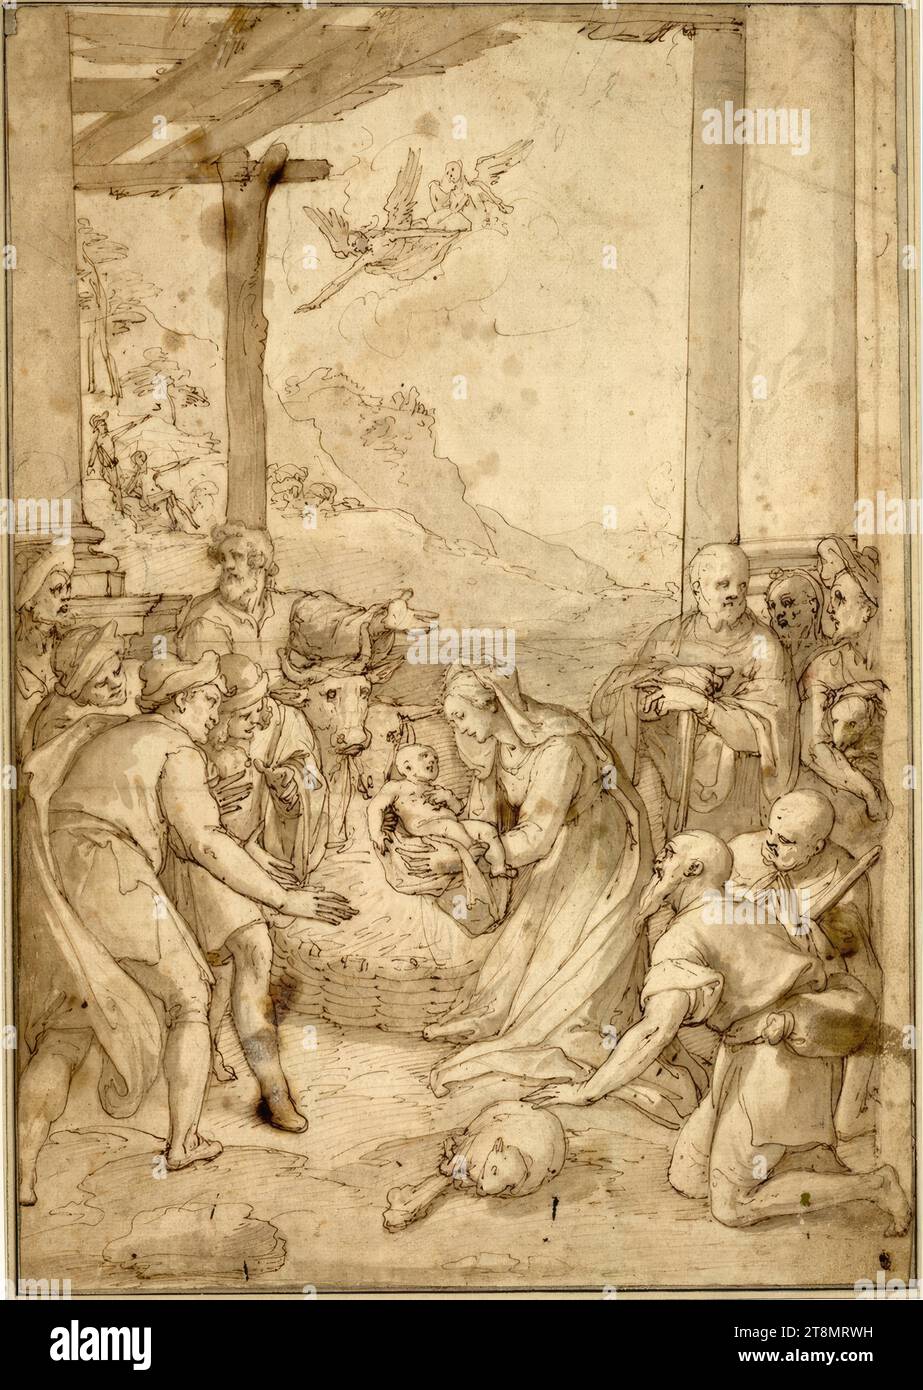 Adoration of the Shepherds, Federico Zuccari (Sant' Angelo in Vado 1540/41 - 1609 Ancona), drawing, chalk; Feather; washed; brownish paper, 39.5 x 27.7 cm, l.l. Duke Albert of Saxe-Teschen Stock Photo